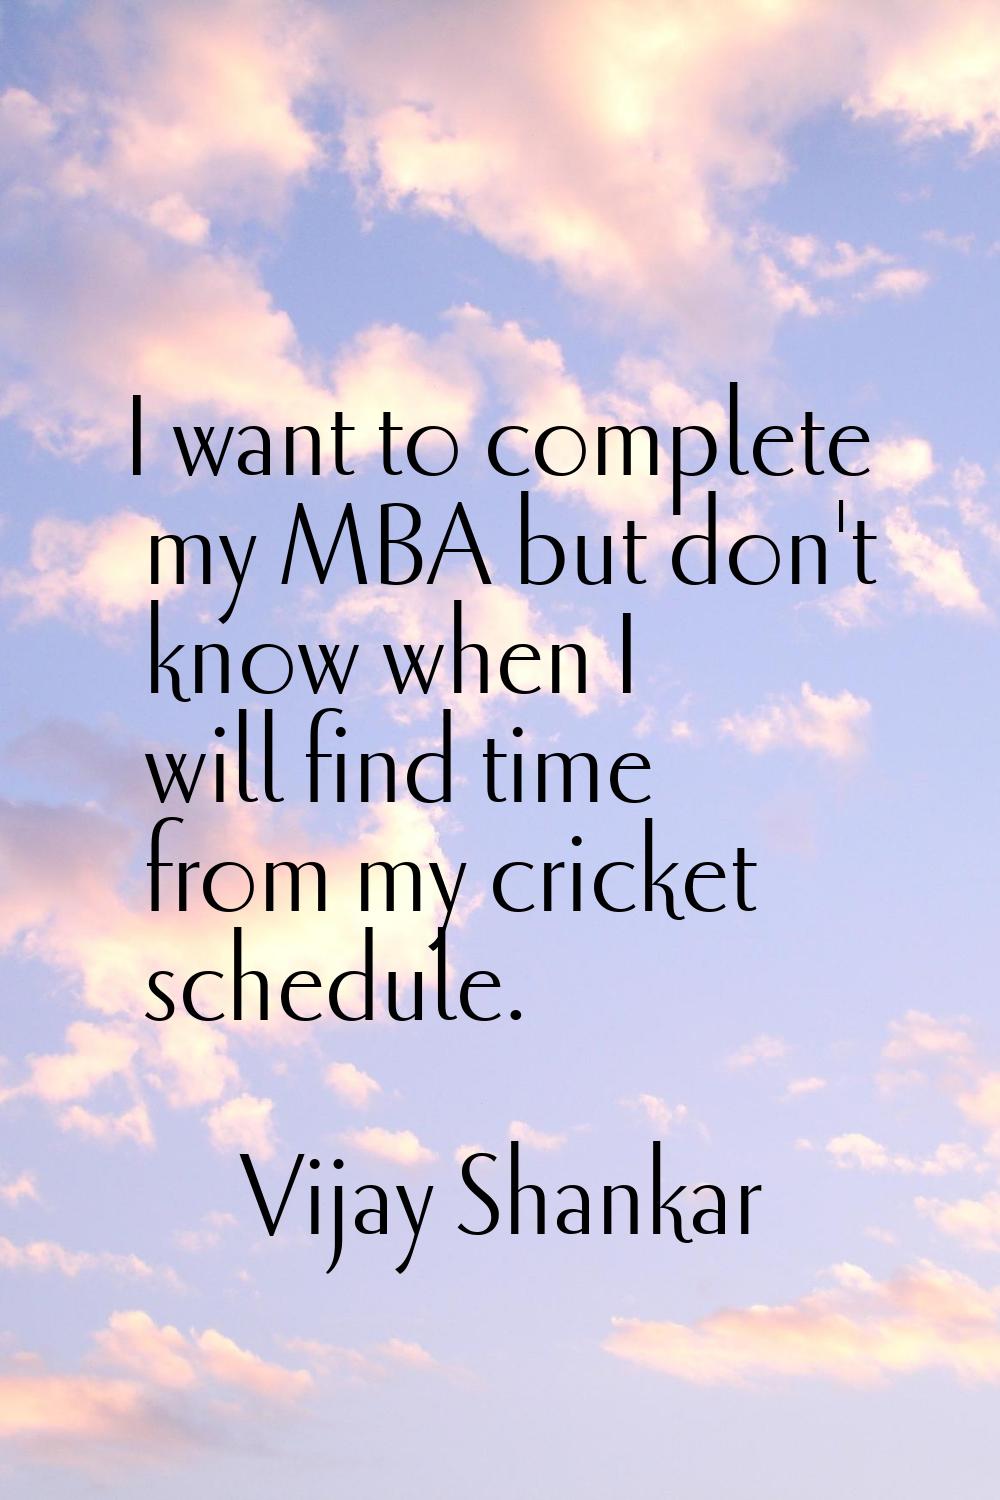 I want to complete my MBA but don't know when I will find time from my cricket schedule.